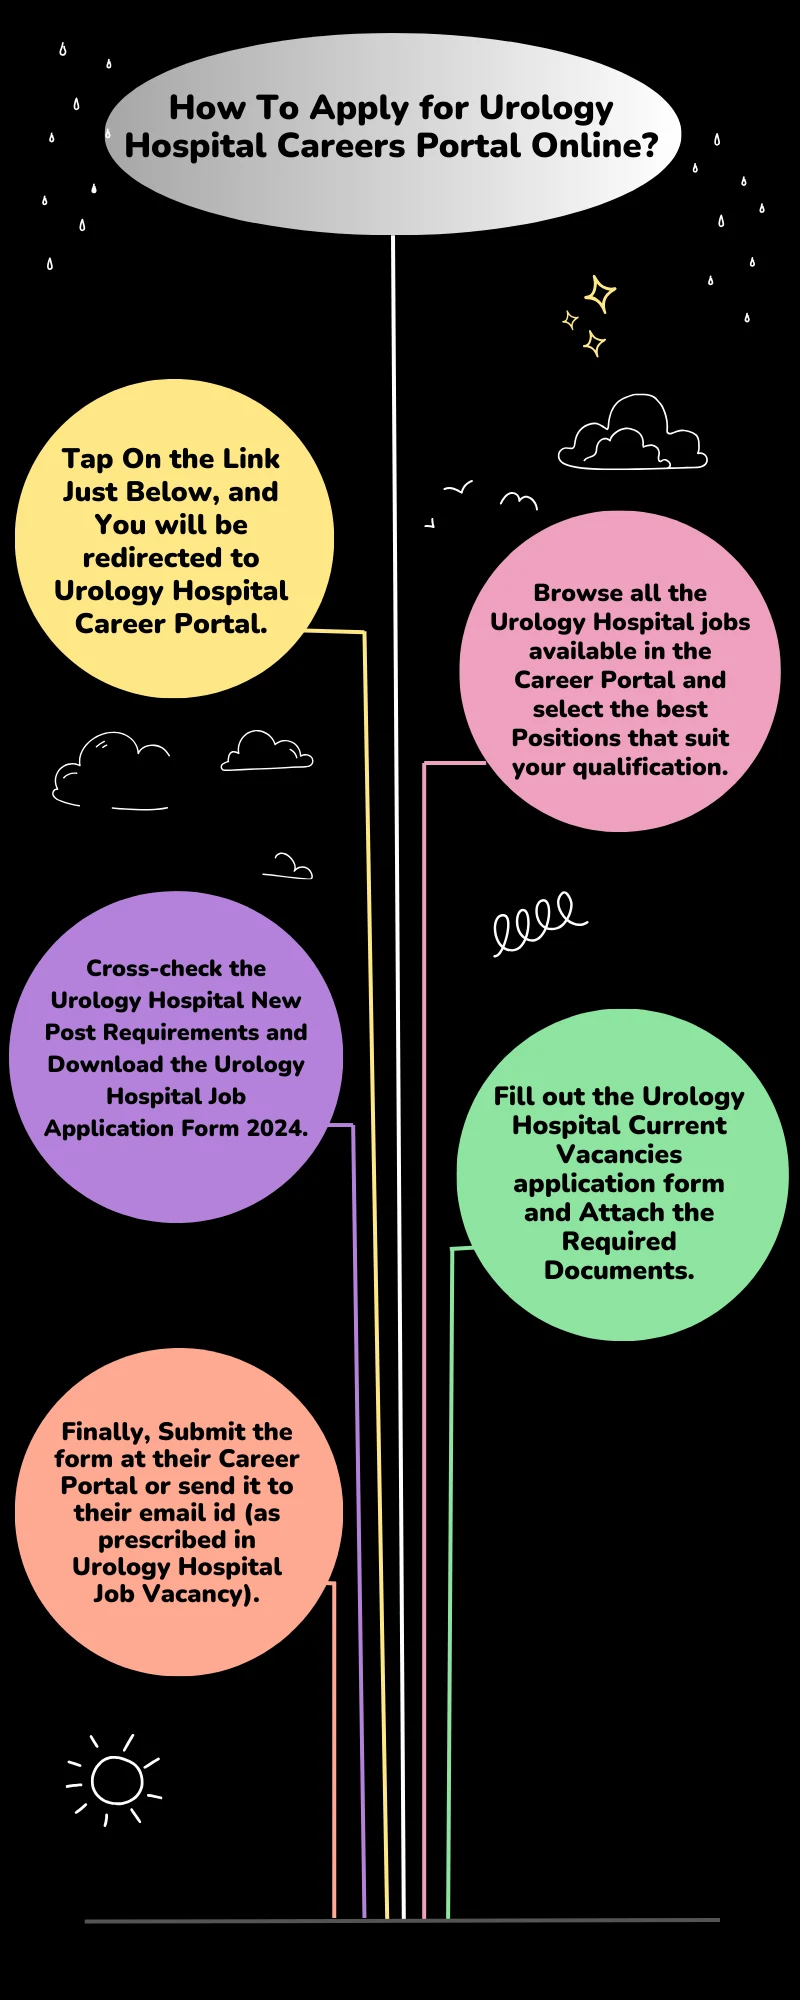 How To Apply for Urology Hospital Careers Portal Online?